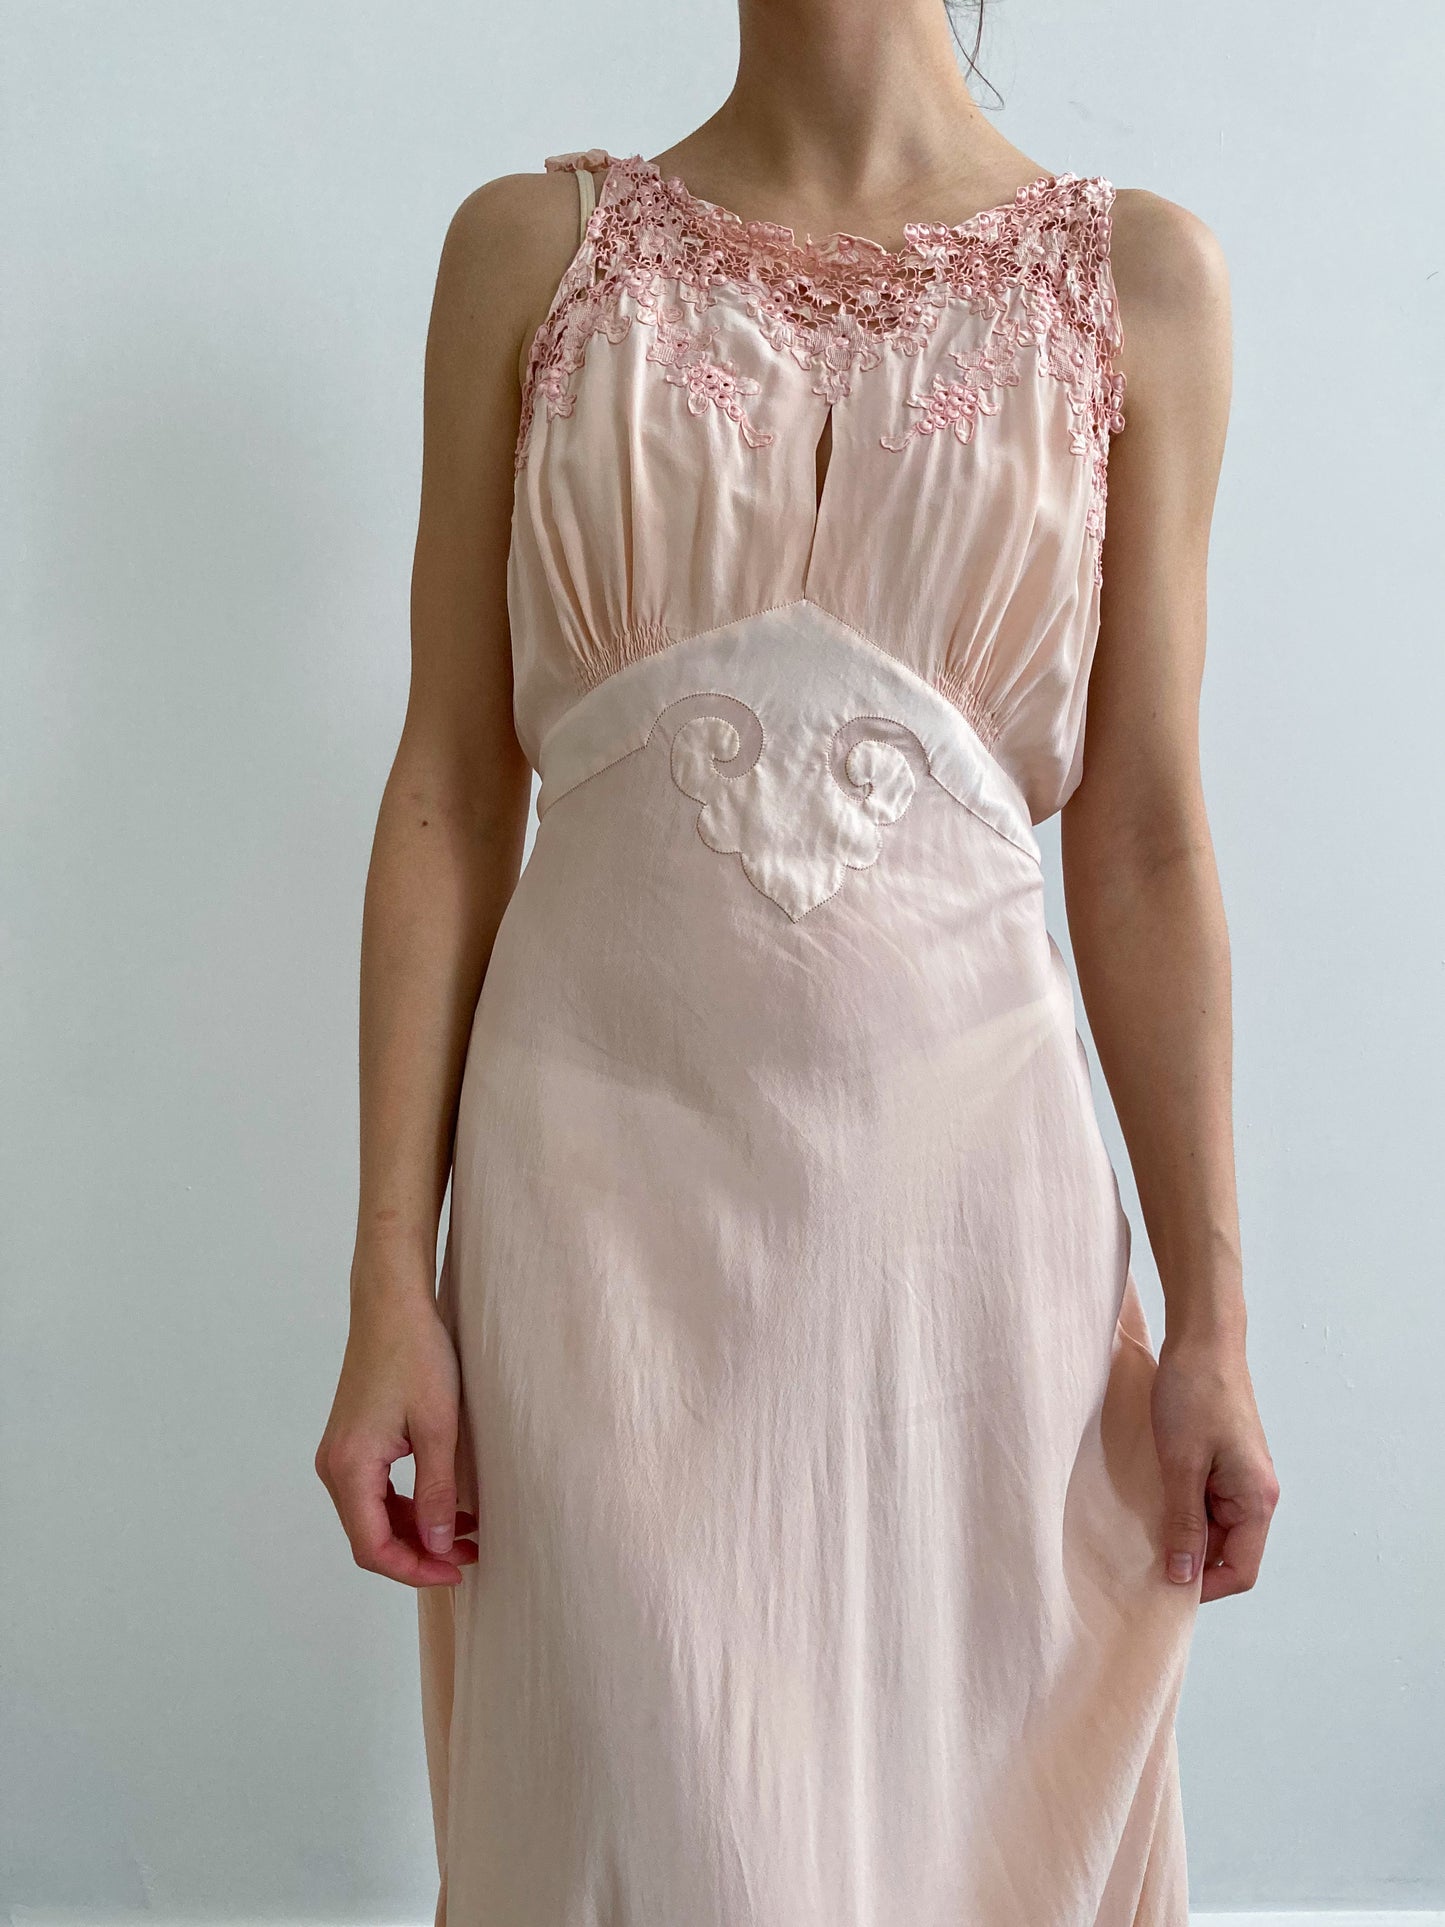 1930s Pink Silk Slip Gown with Tie Straps & Intricate Embroidery Size S/M